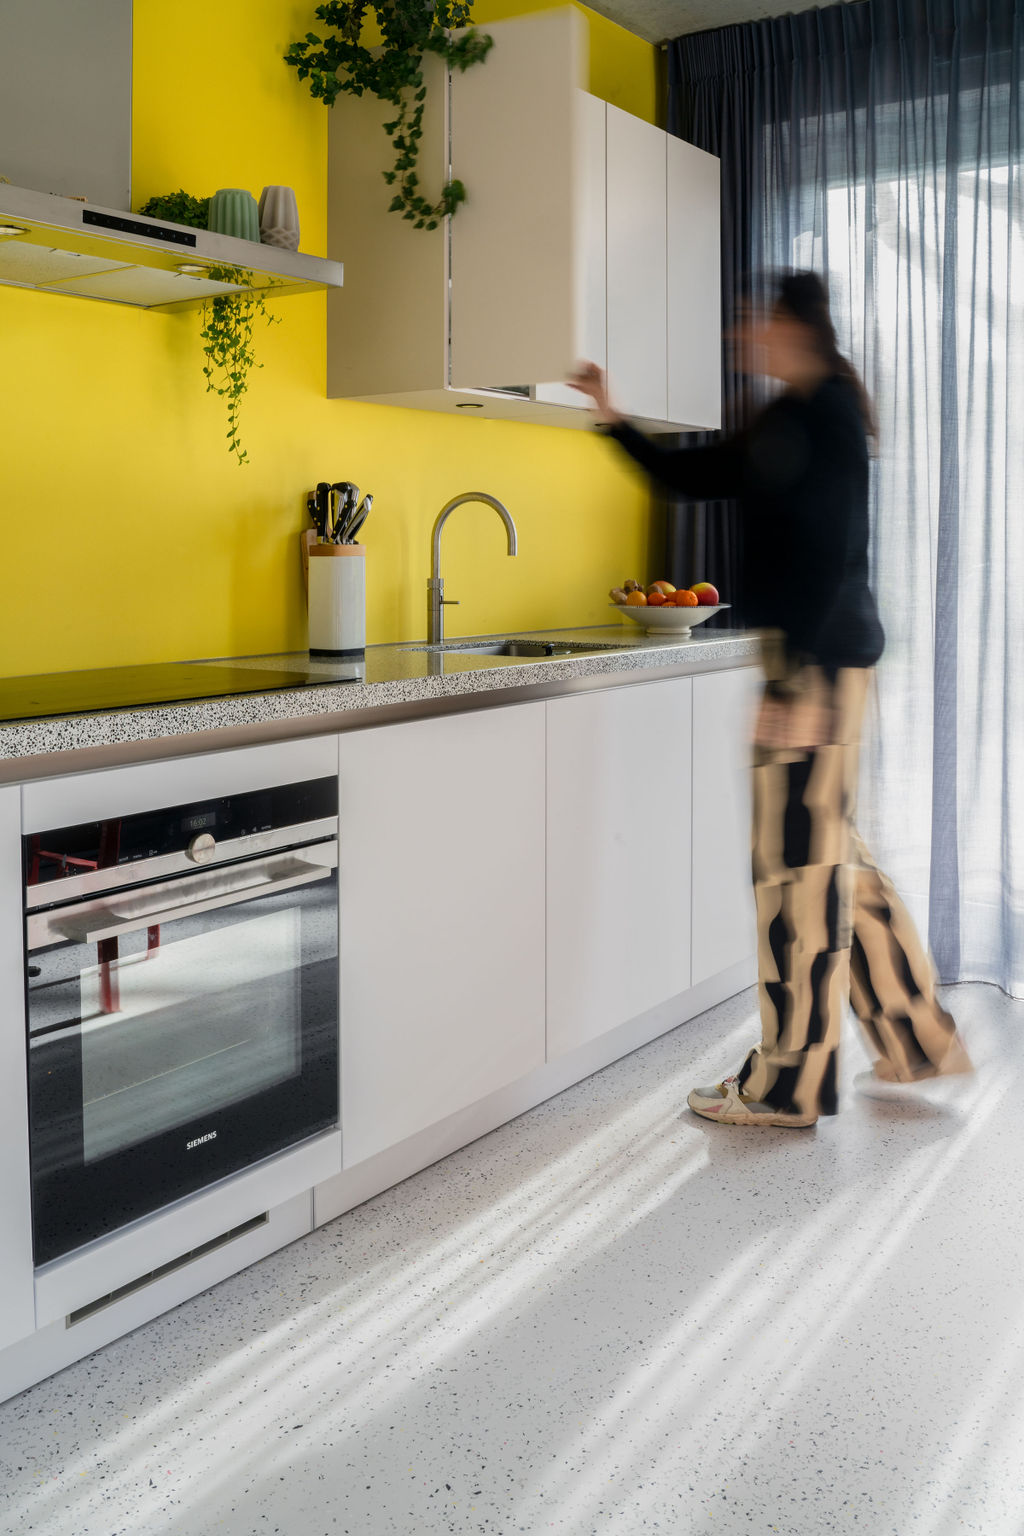 The Good Floor's mix flooring concept in a kitchen with yellow walls